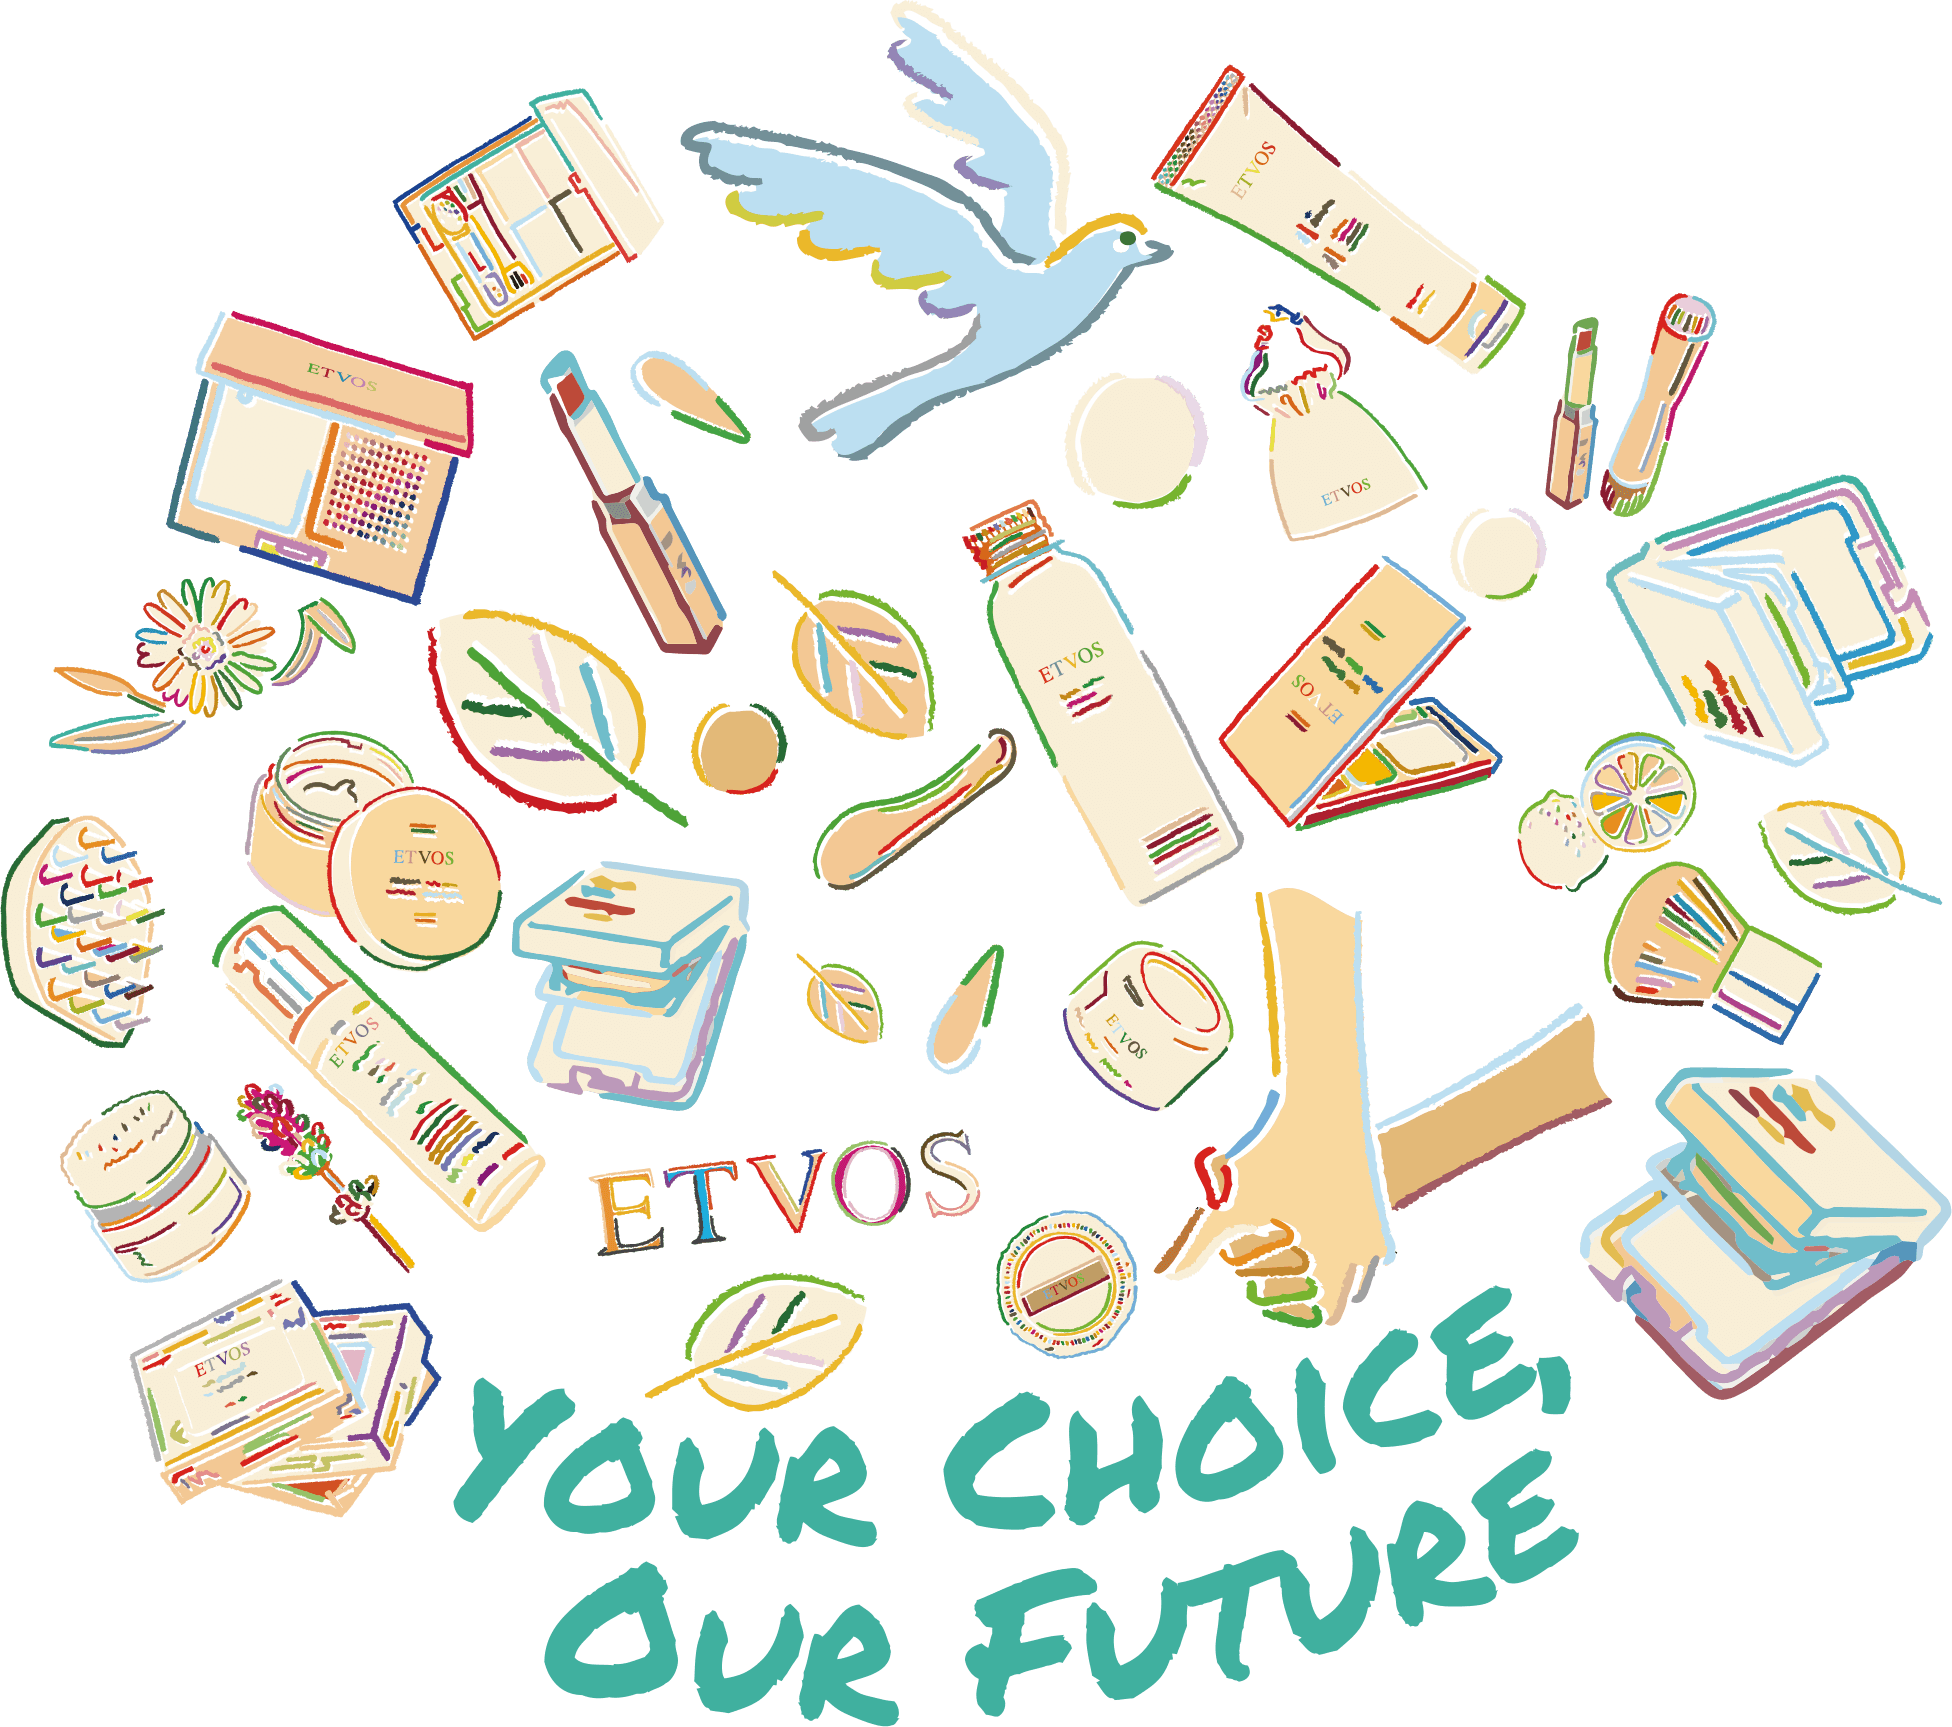 your choice,our future